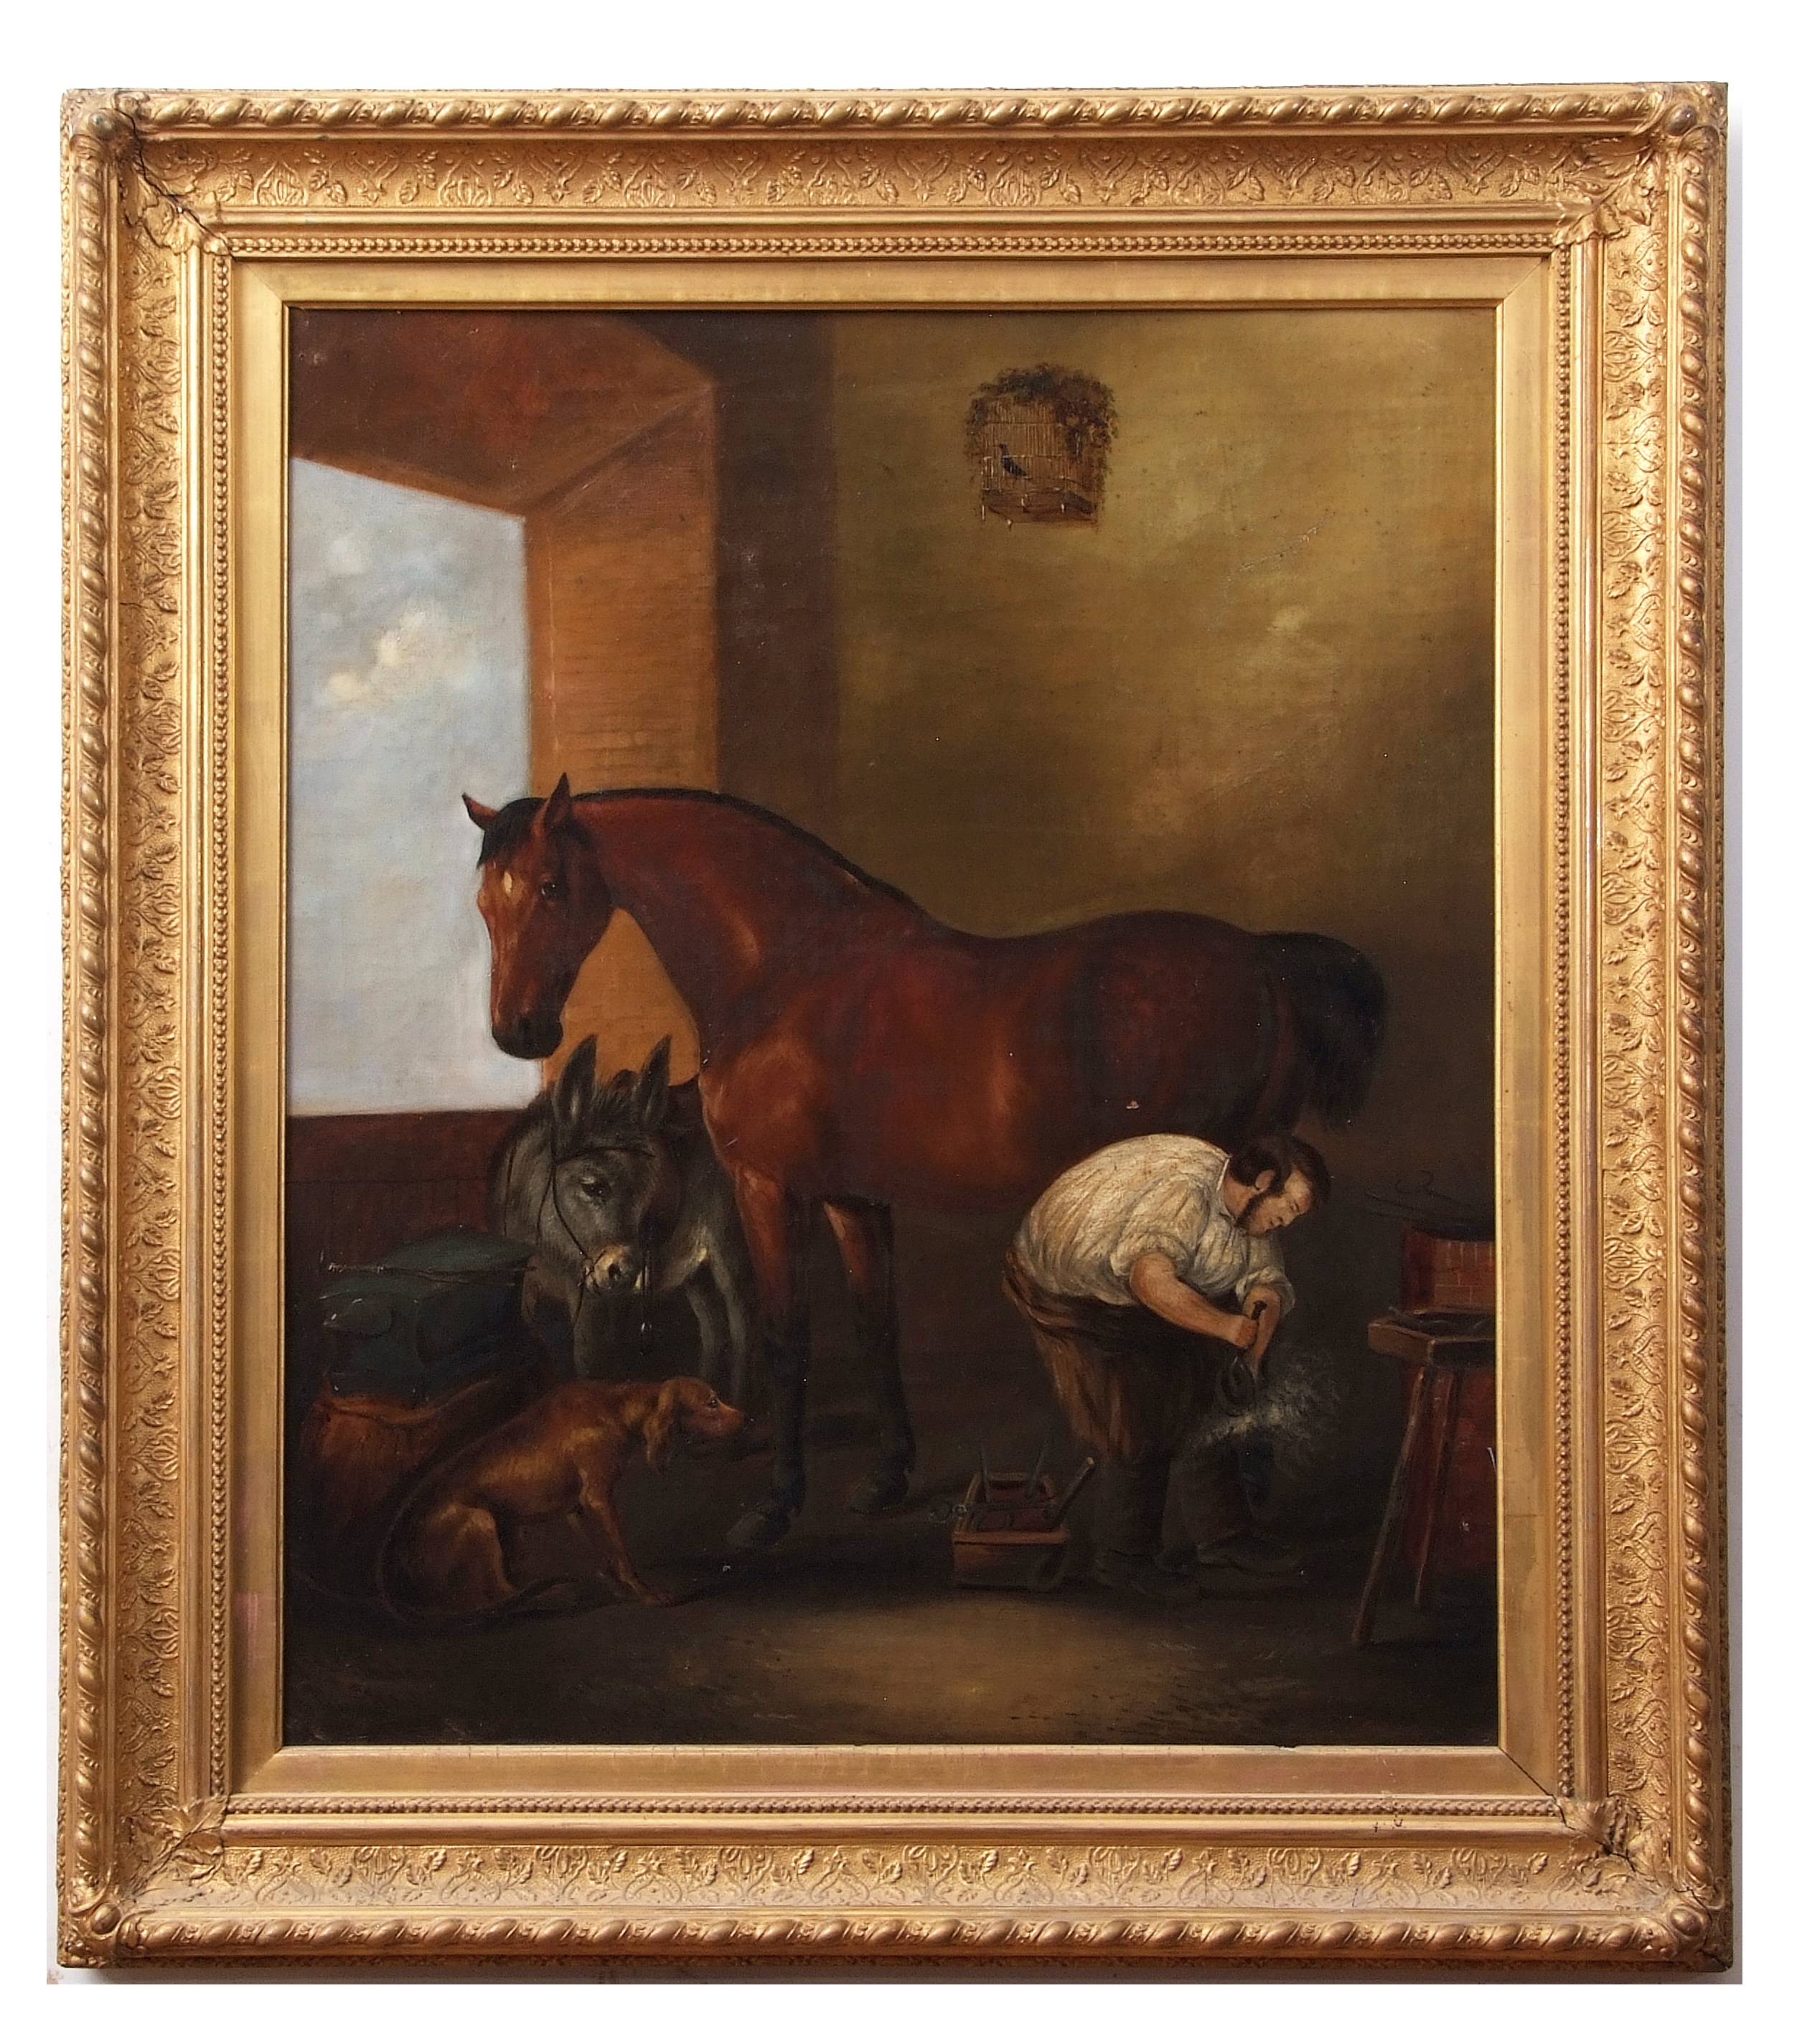 After Sir Edwin Landseer (19th century), "Shoeing", oil on canvas, 59 x 49cm